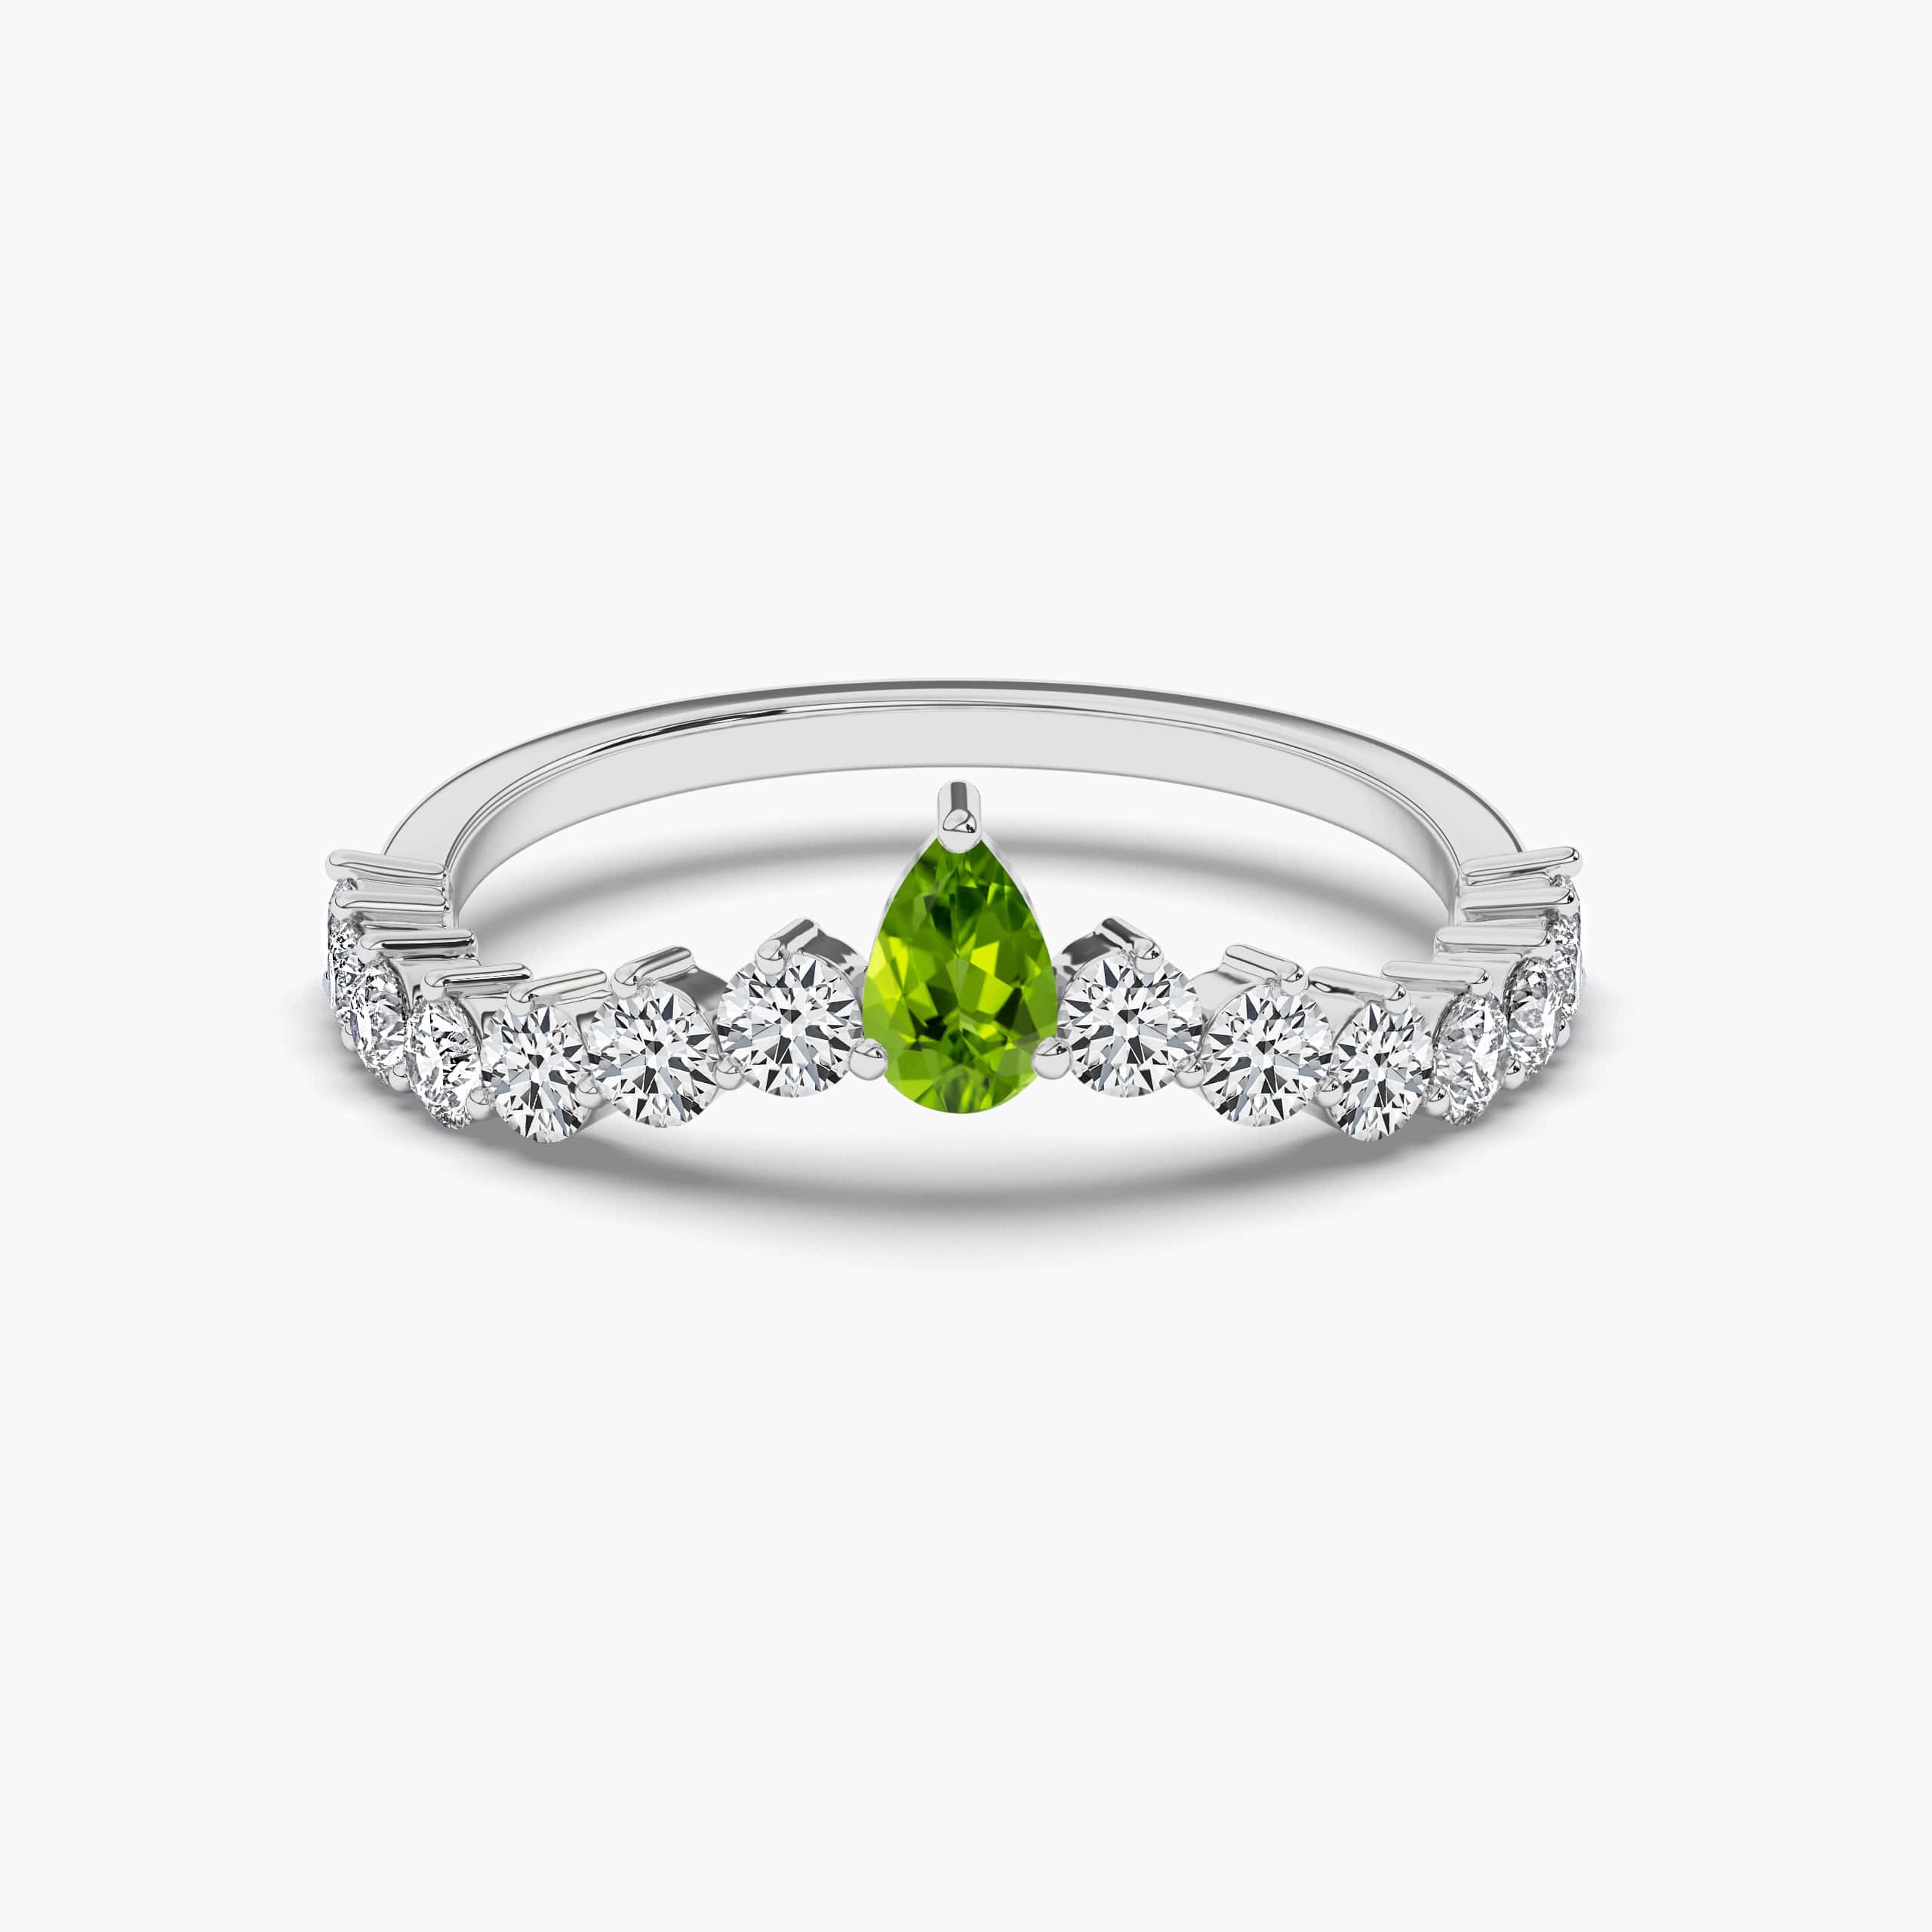 White gold with Pear Shape Genuine Peridot Ring 